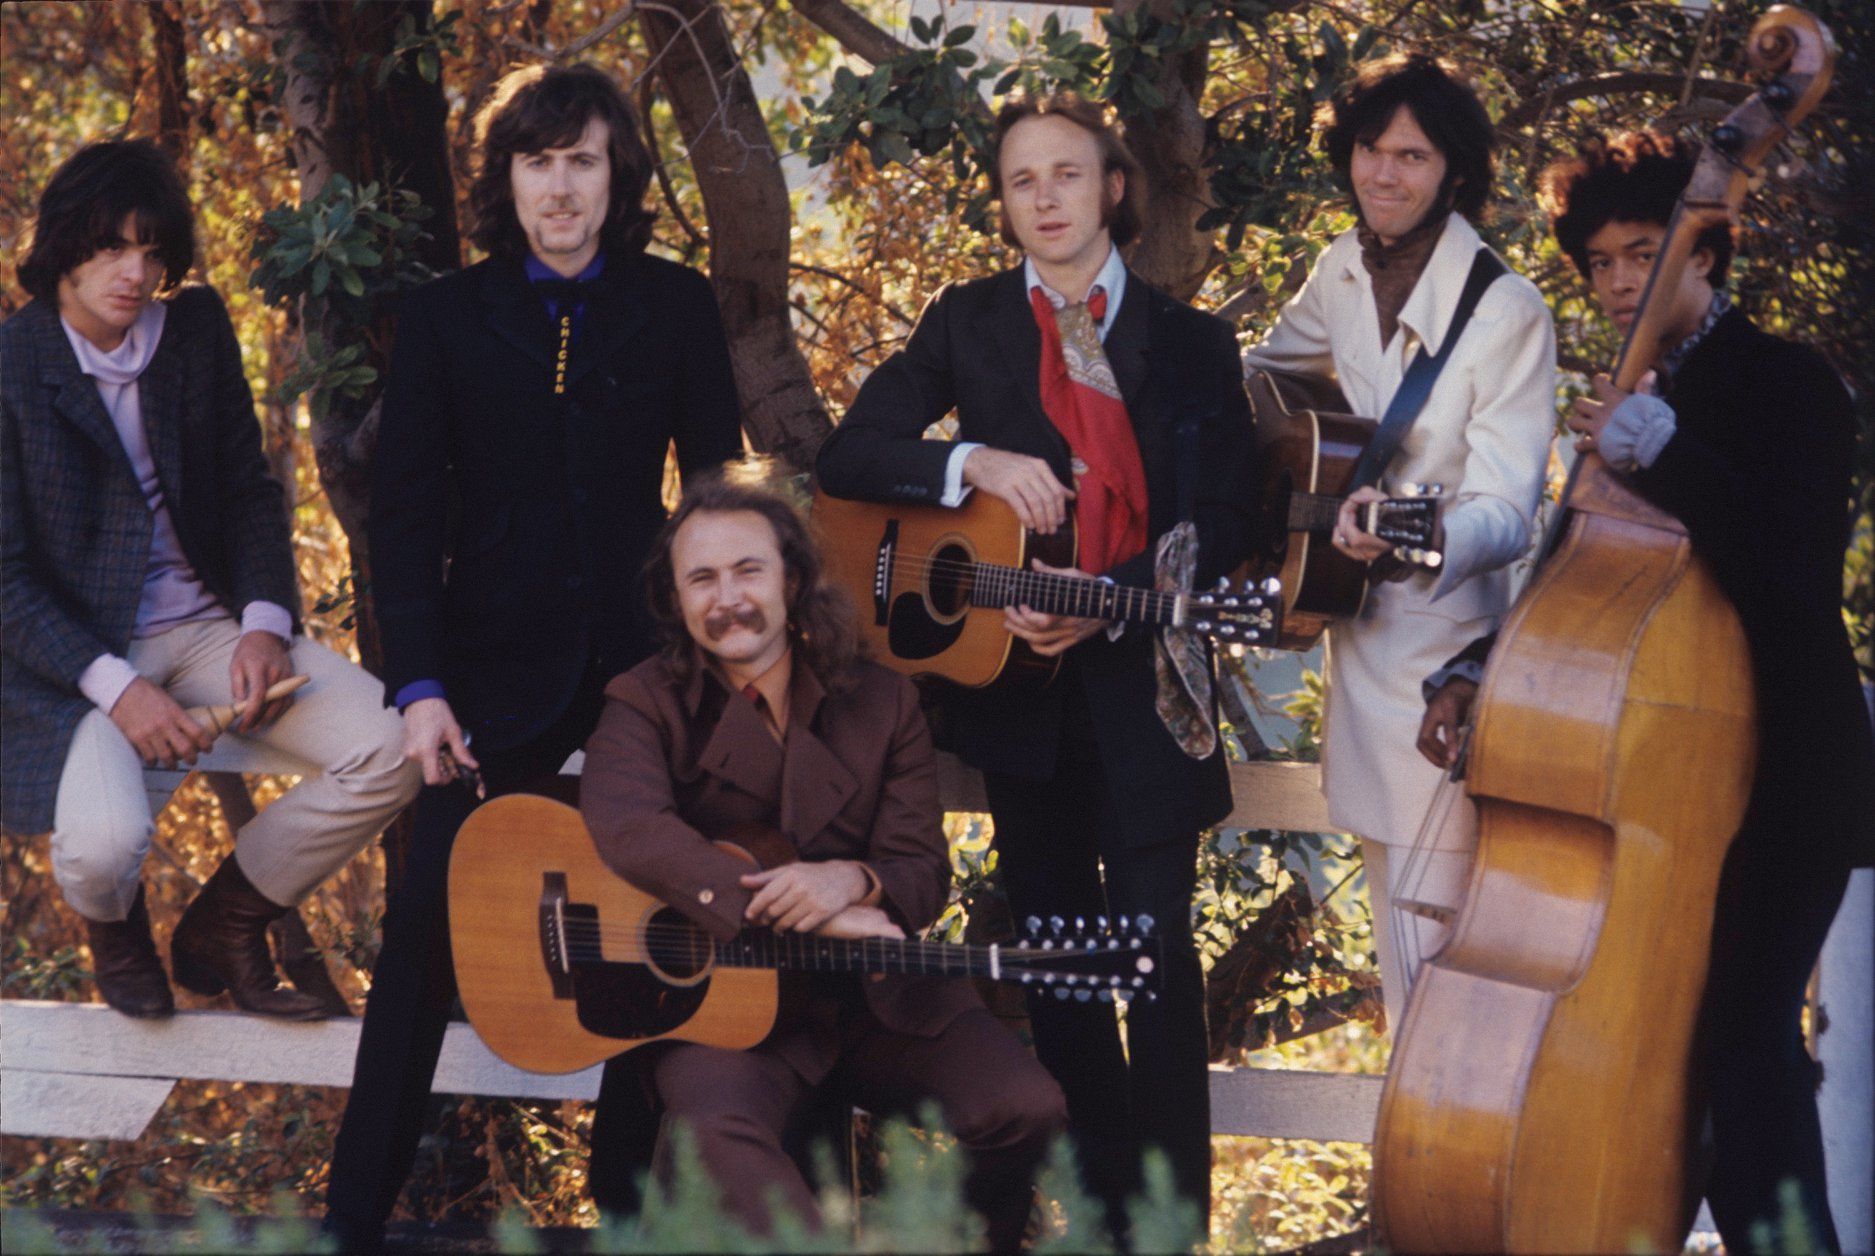 Crosby, Stills, Nash & Young: Who were the members?